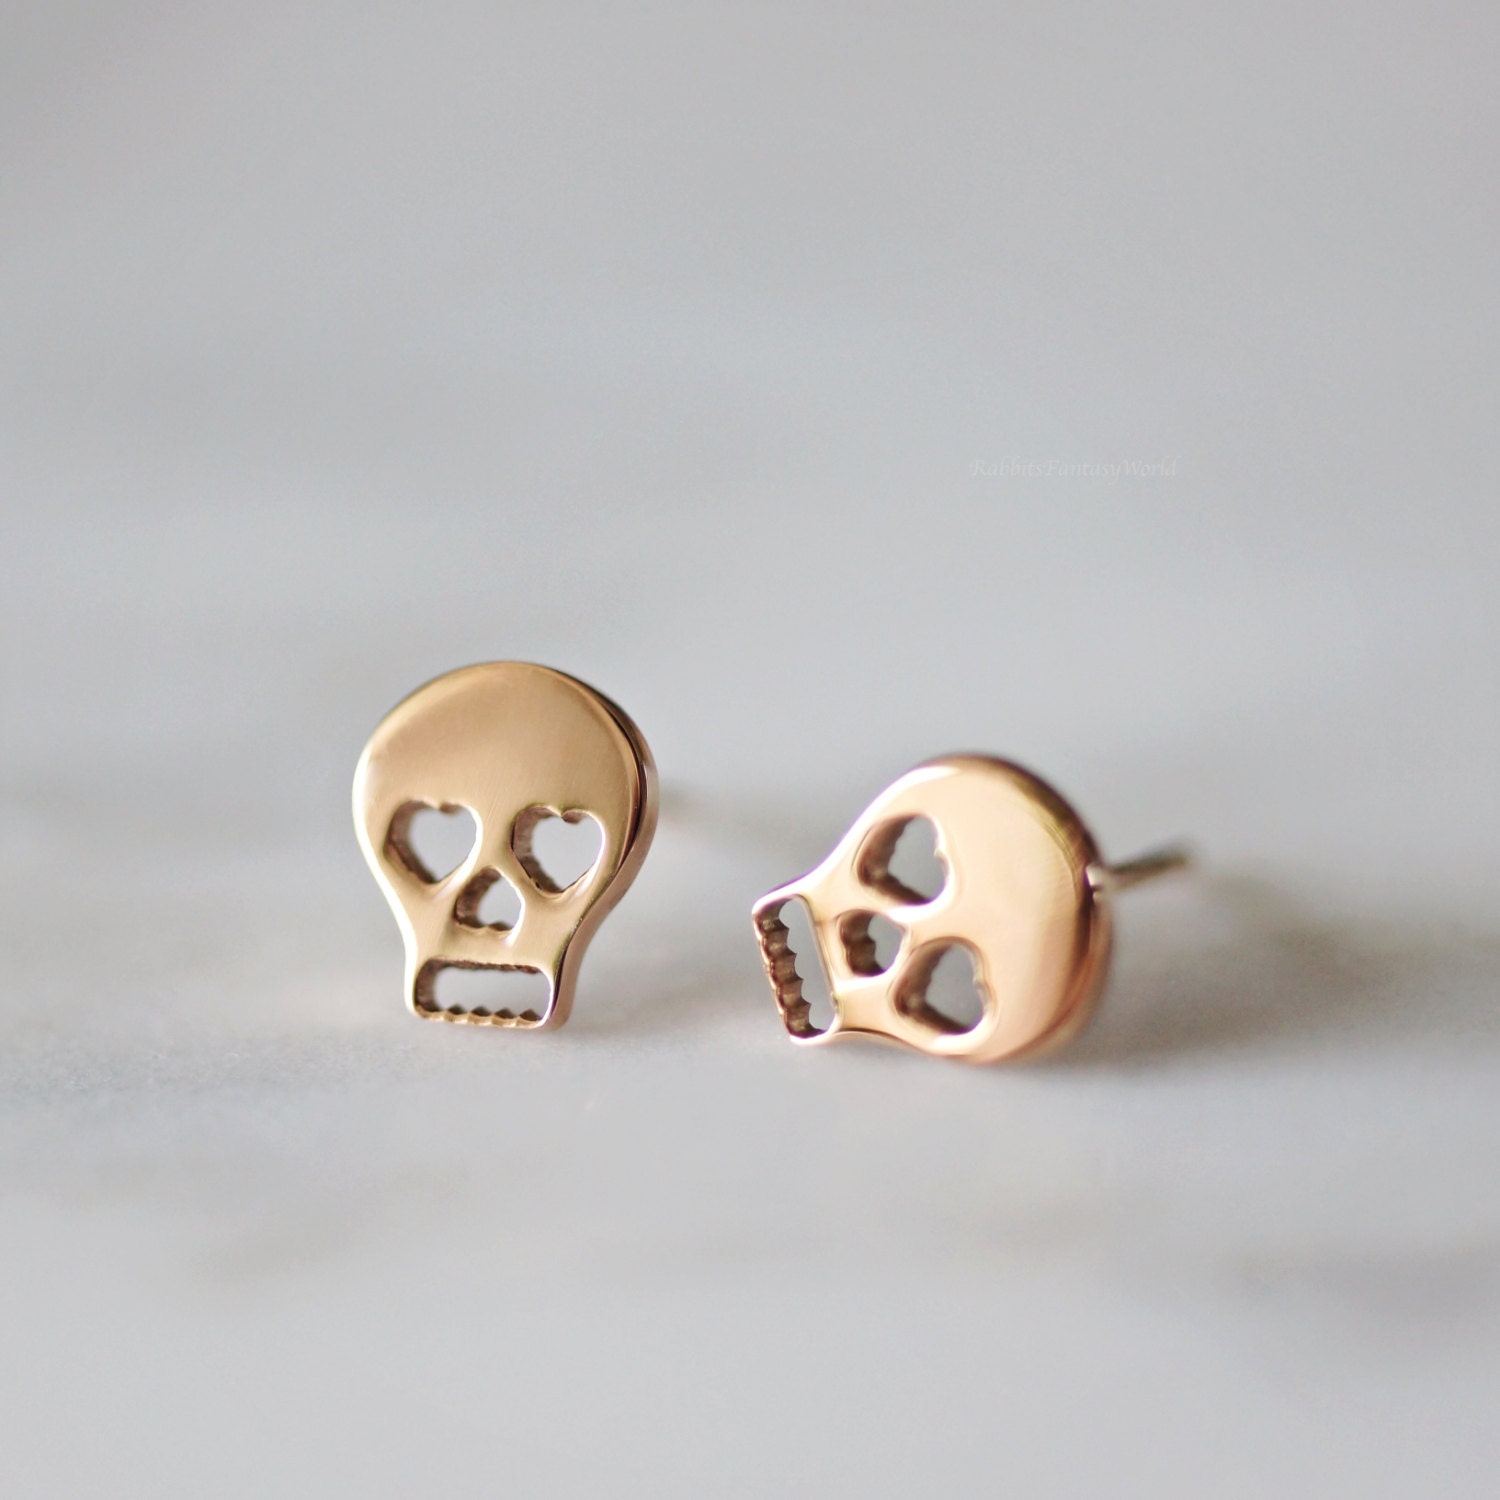 Skull Stud Earrings Rose Gold Silver Gold Chic Jewelry | Etsy